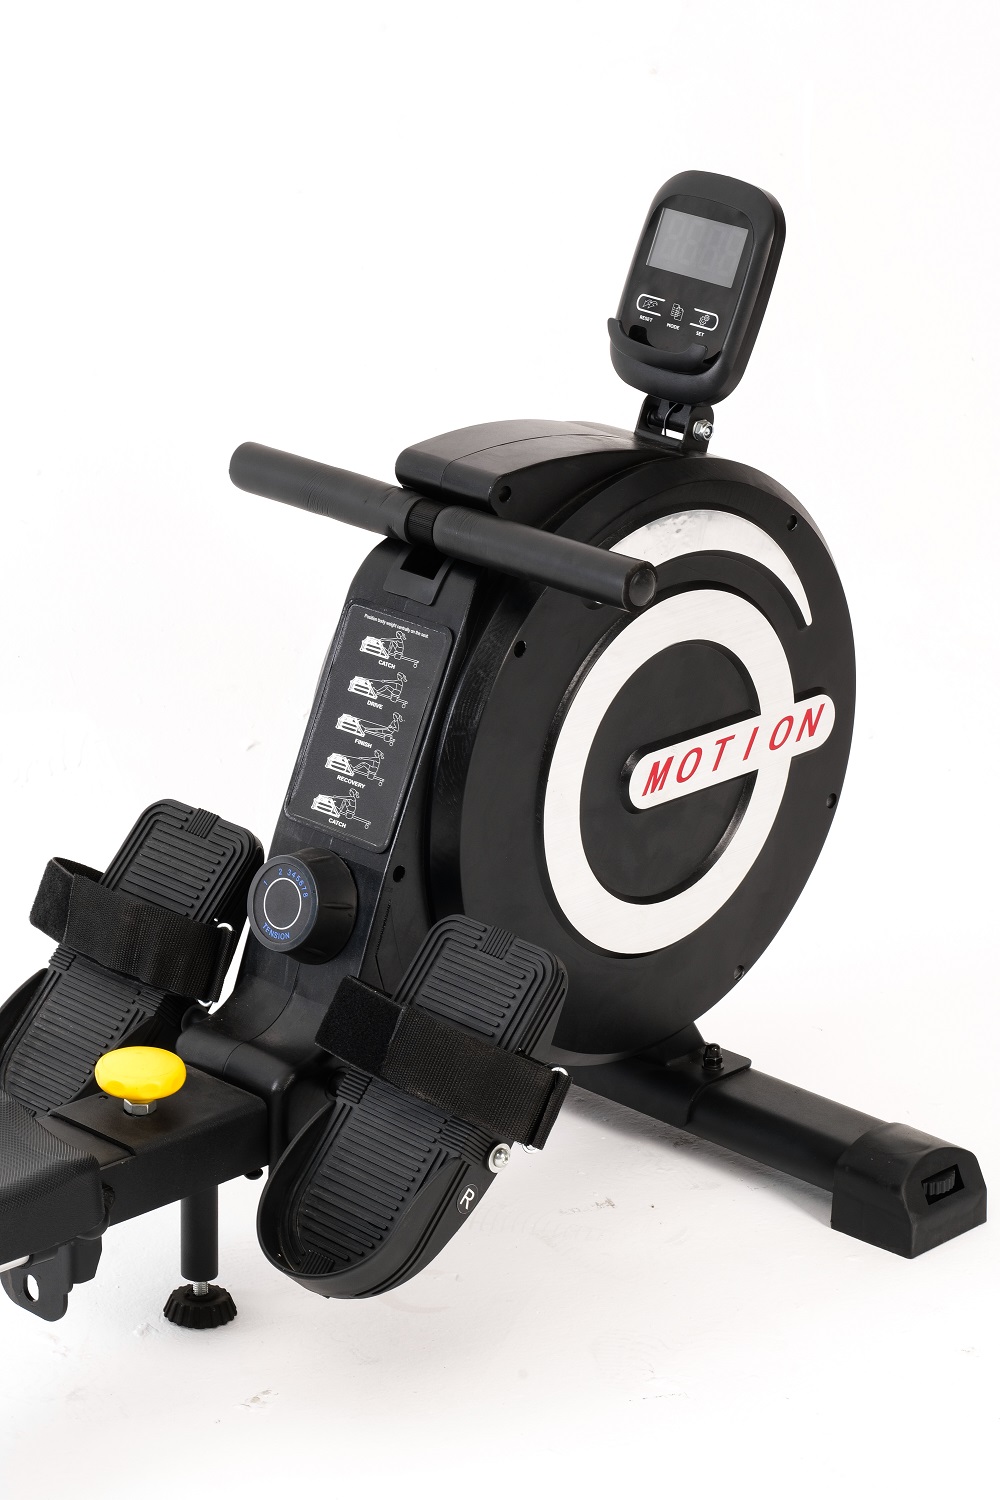 RM06 magnetic rowing machine 